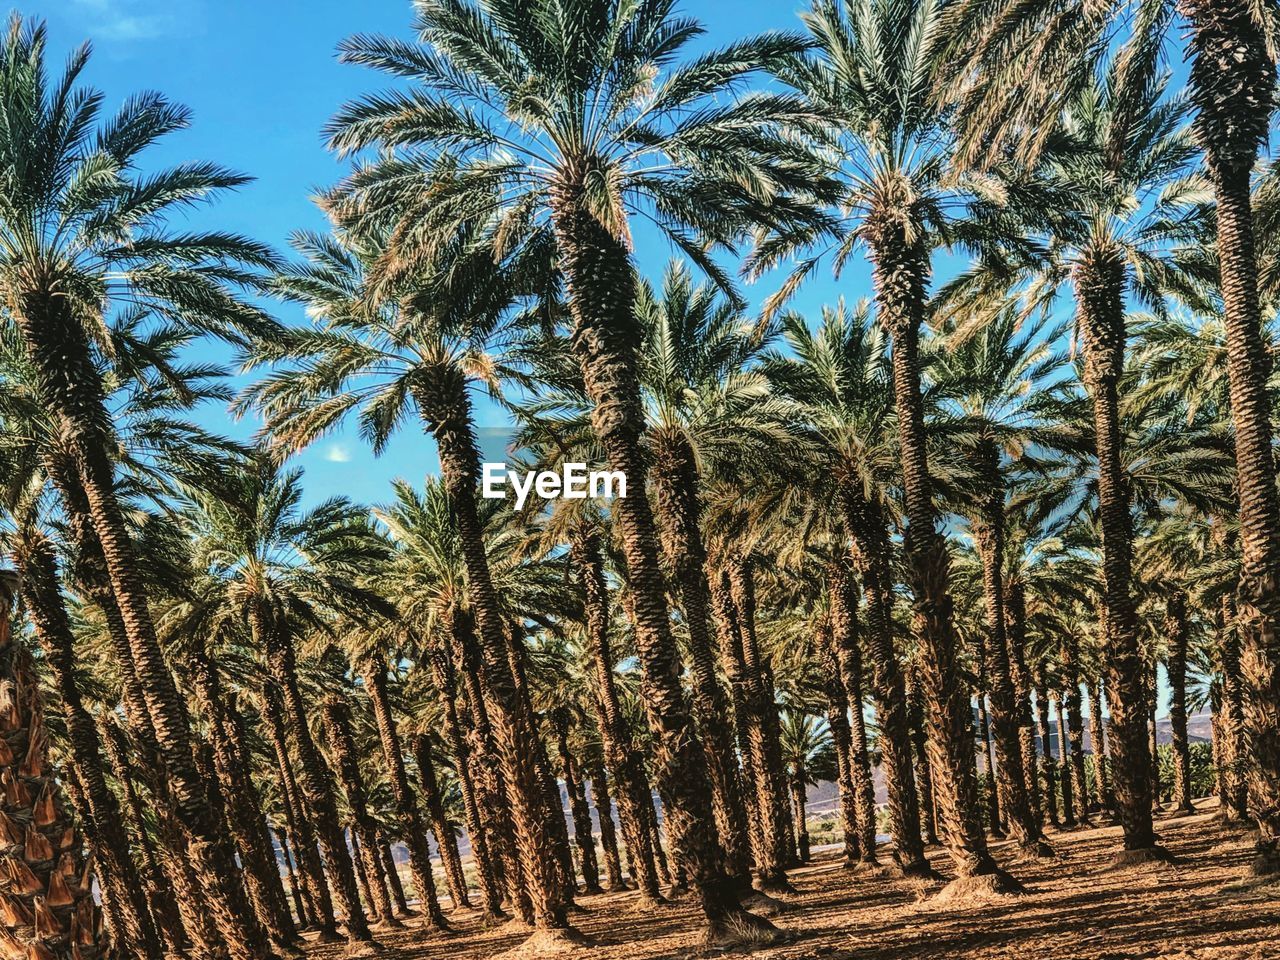 LOW ANGLE VIEW OF PALM TREES